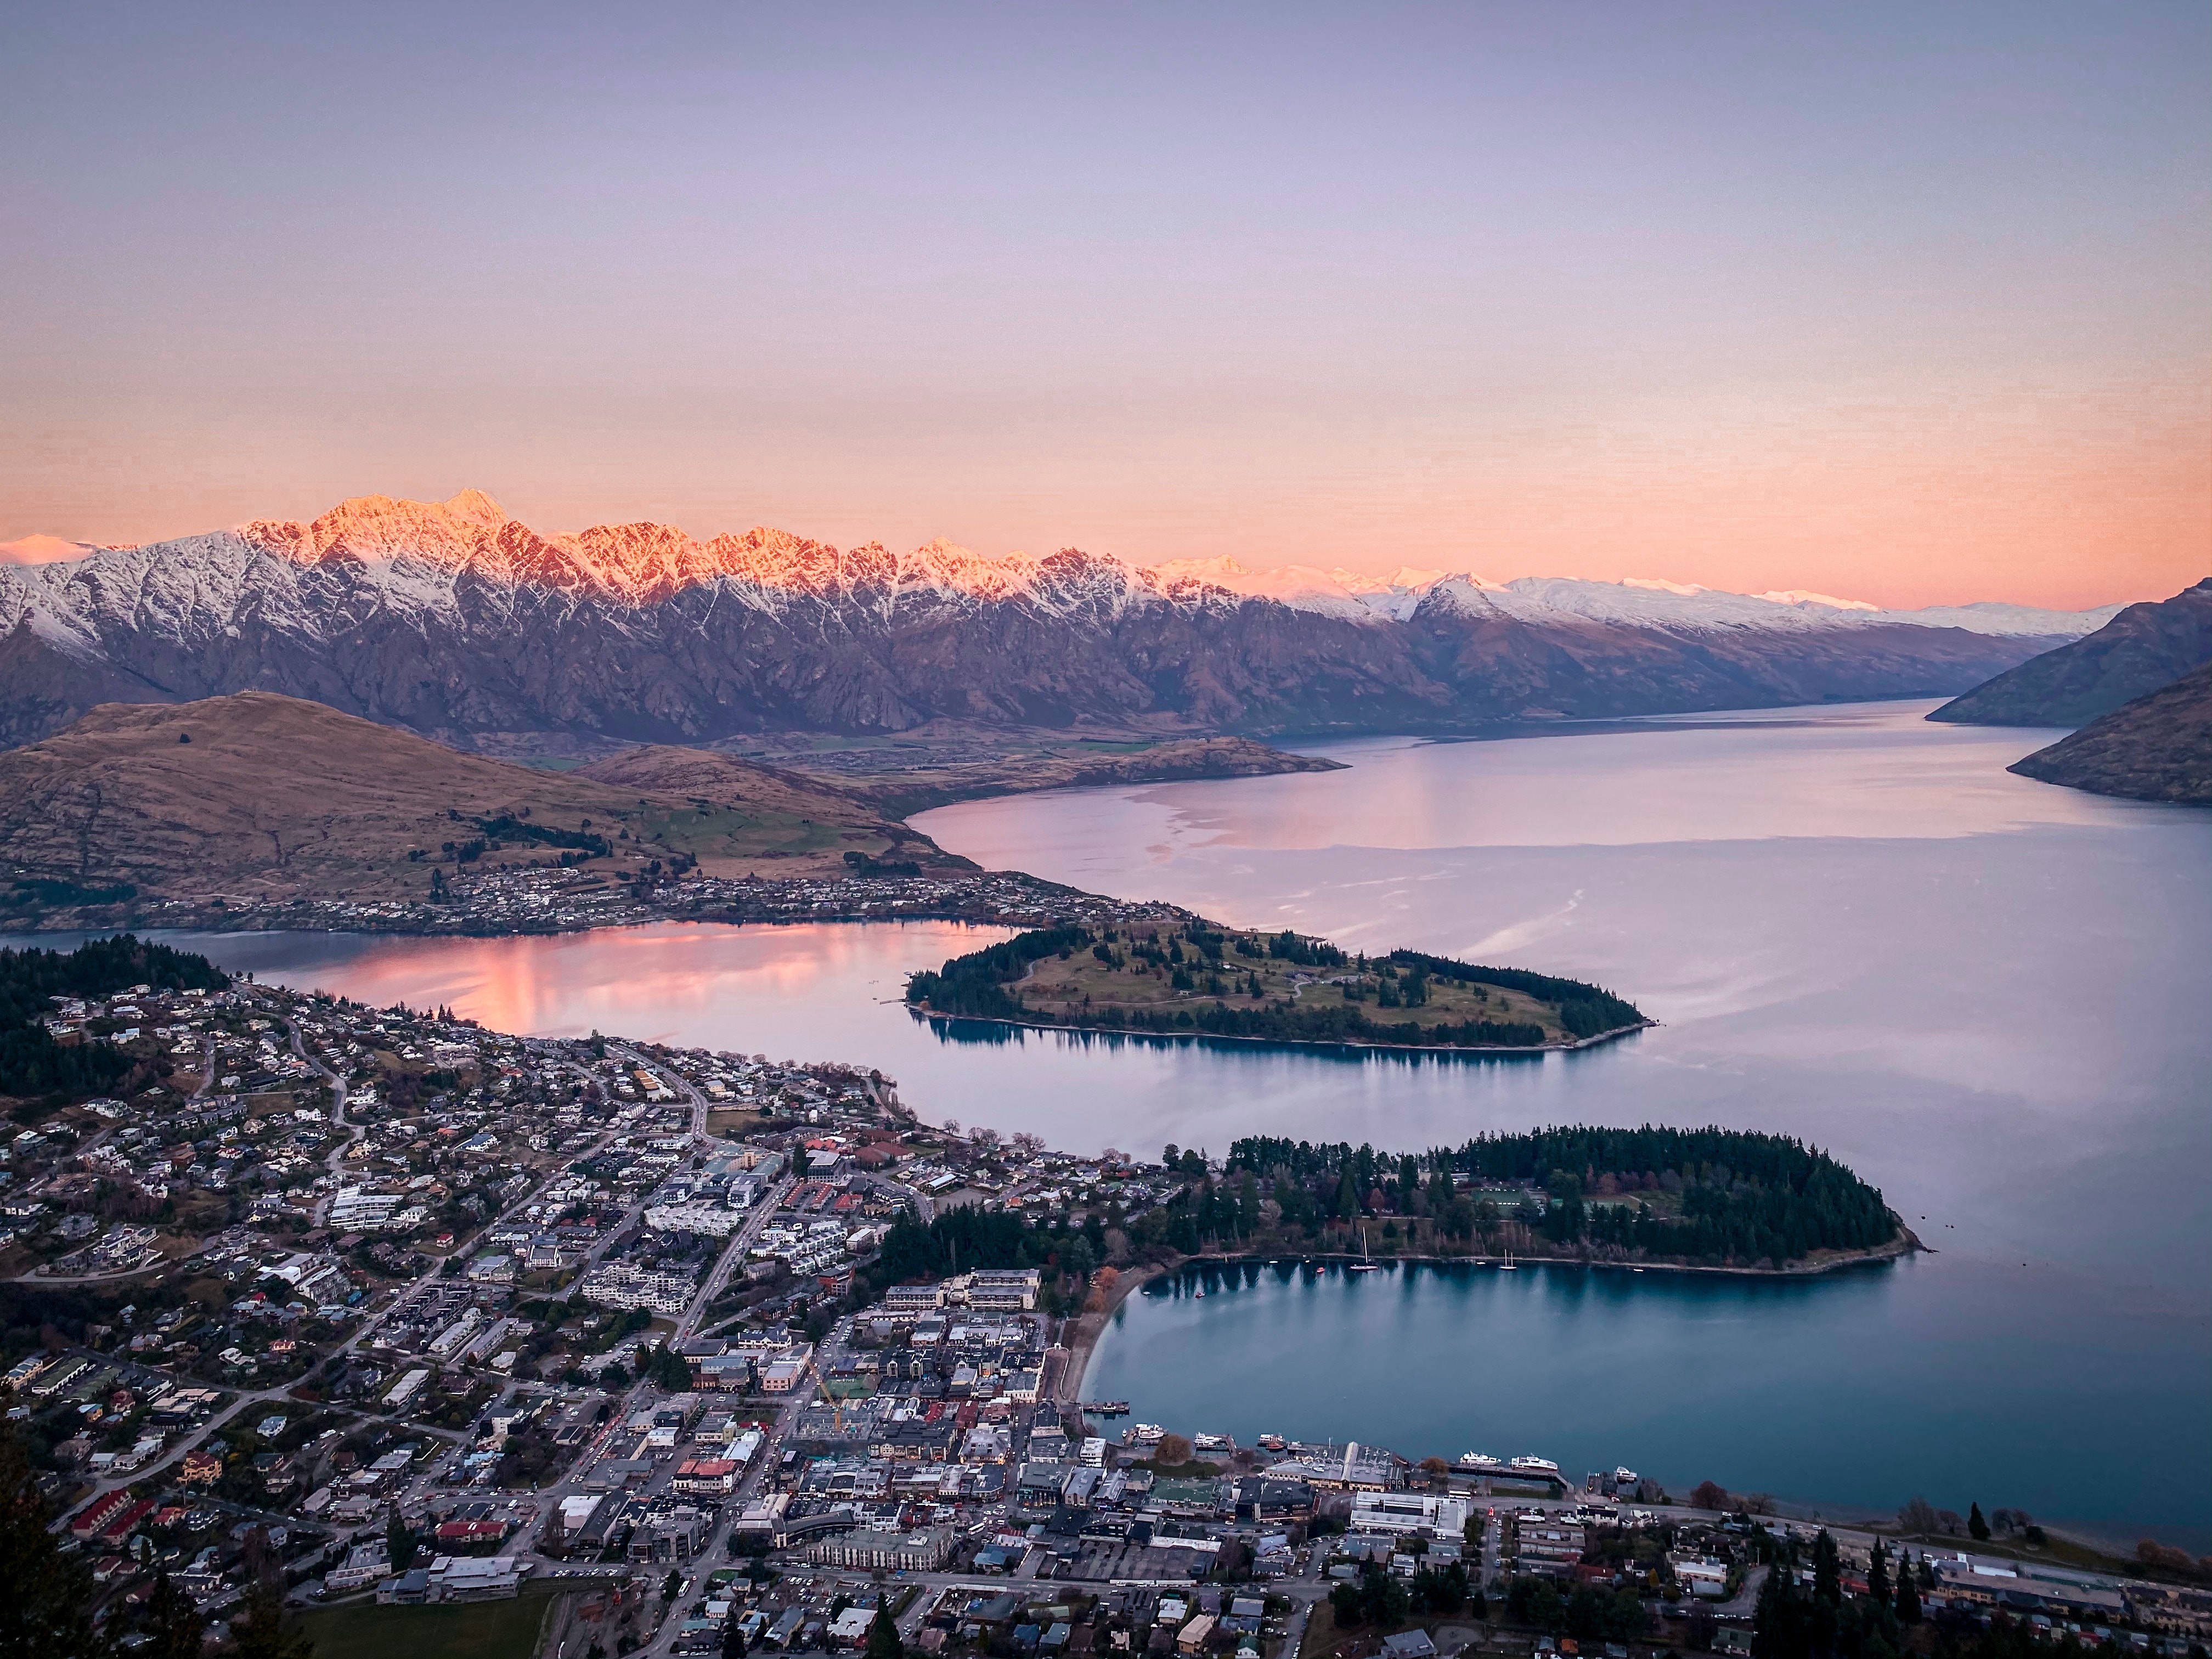 Queenstown from Bob's Peak. Image courtesy Peter Luo and unsplash